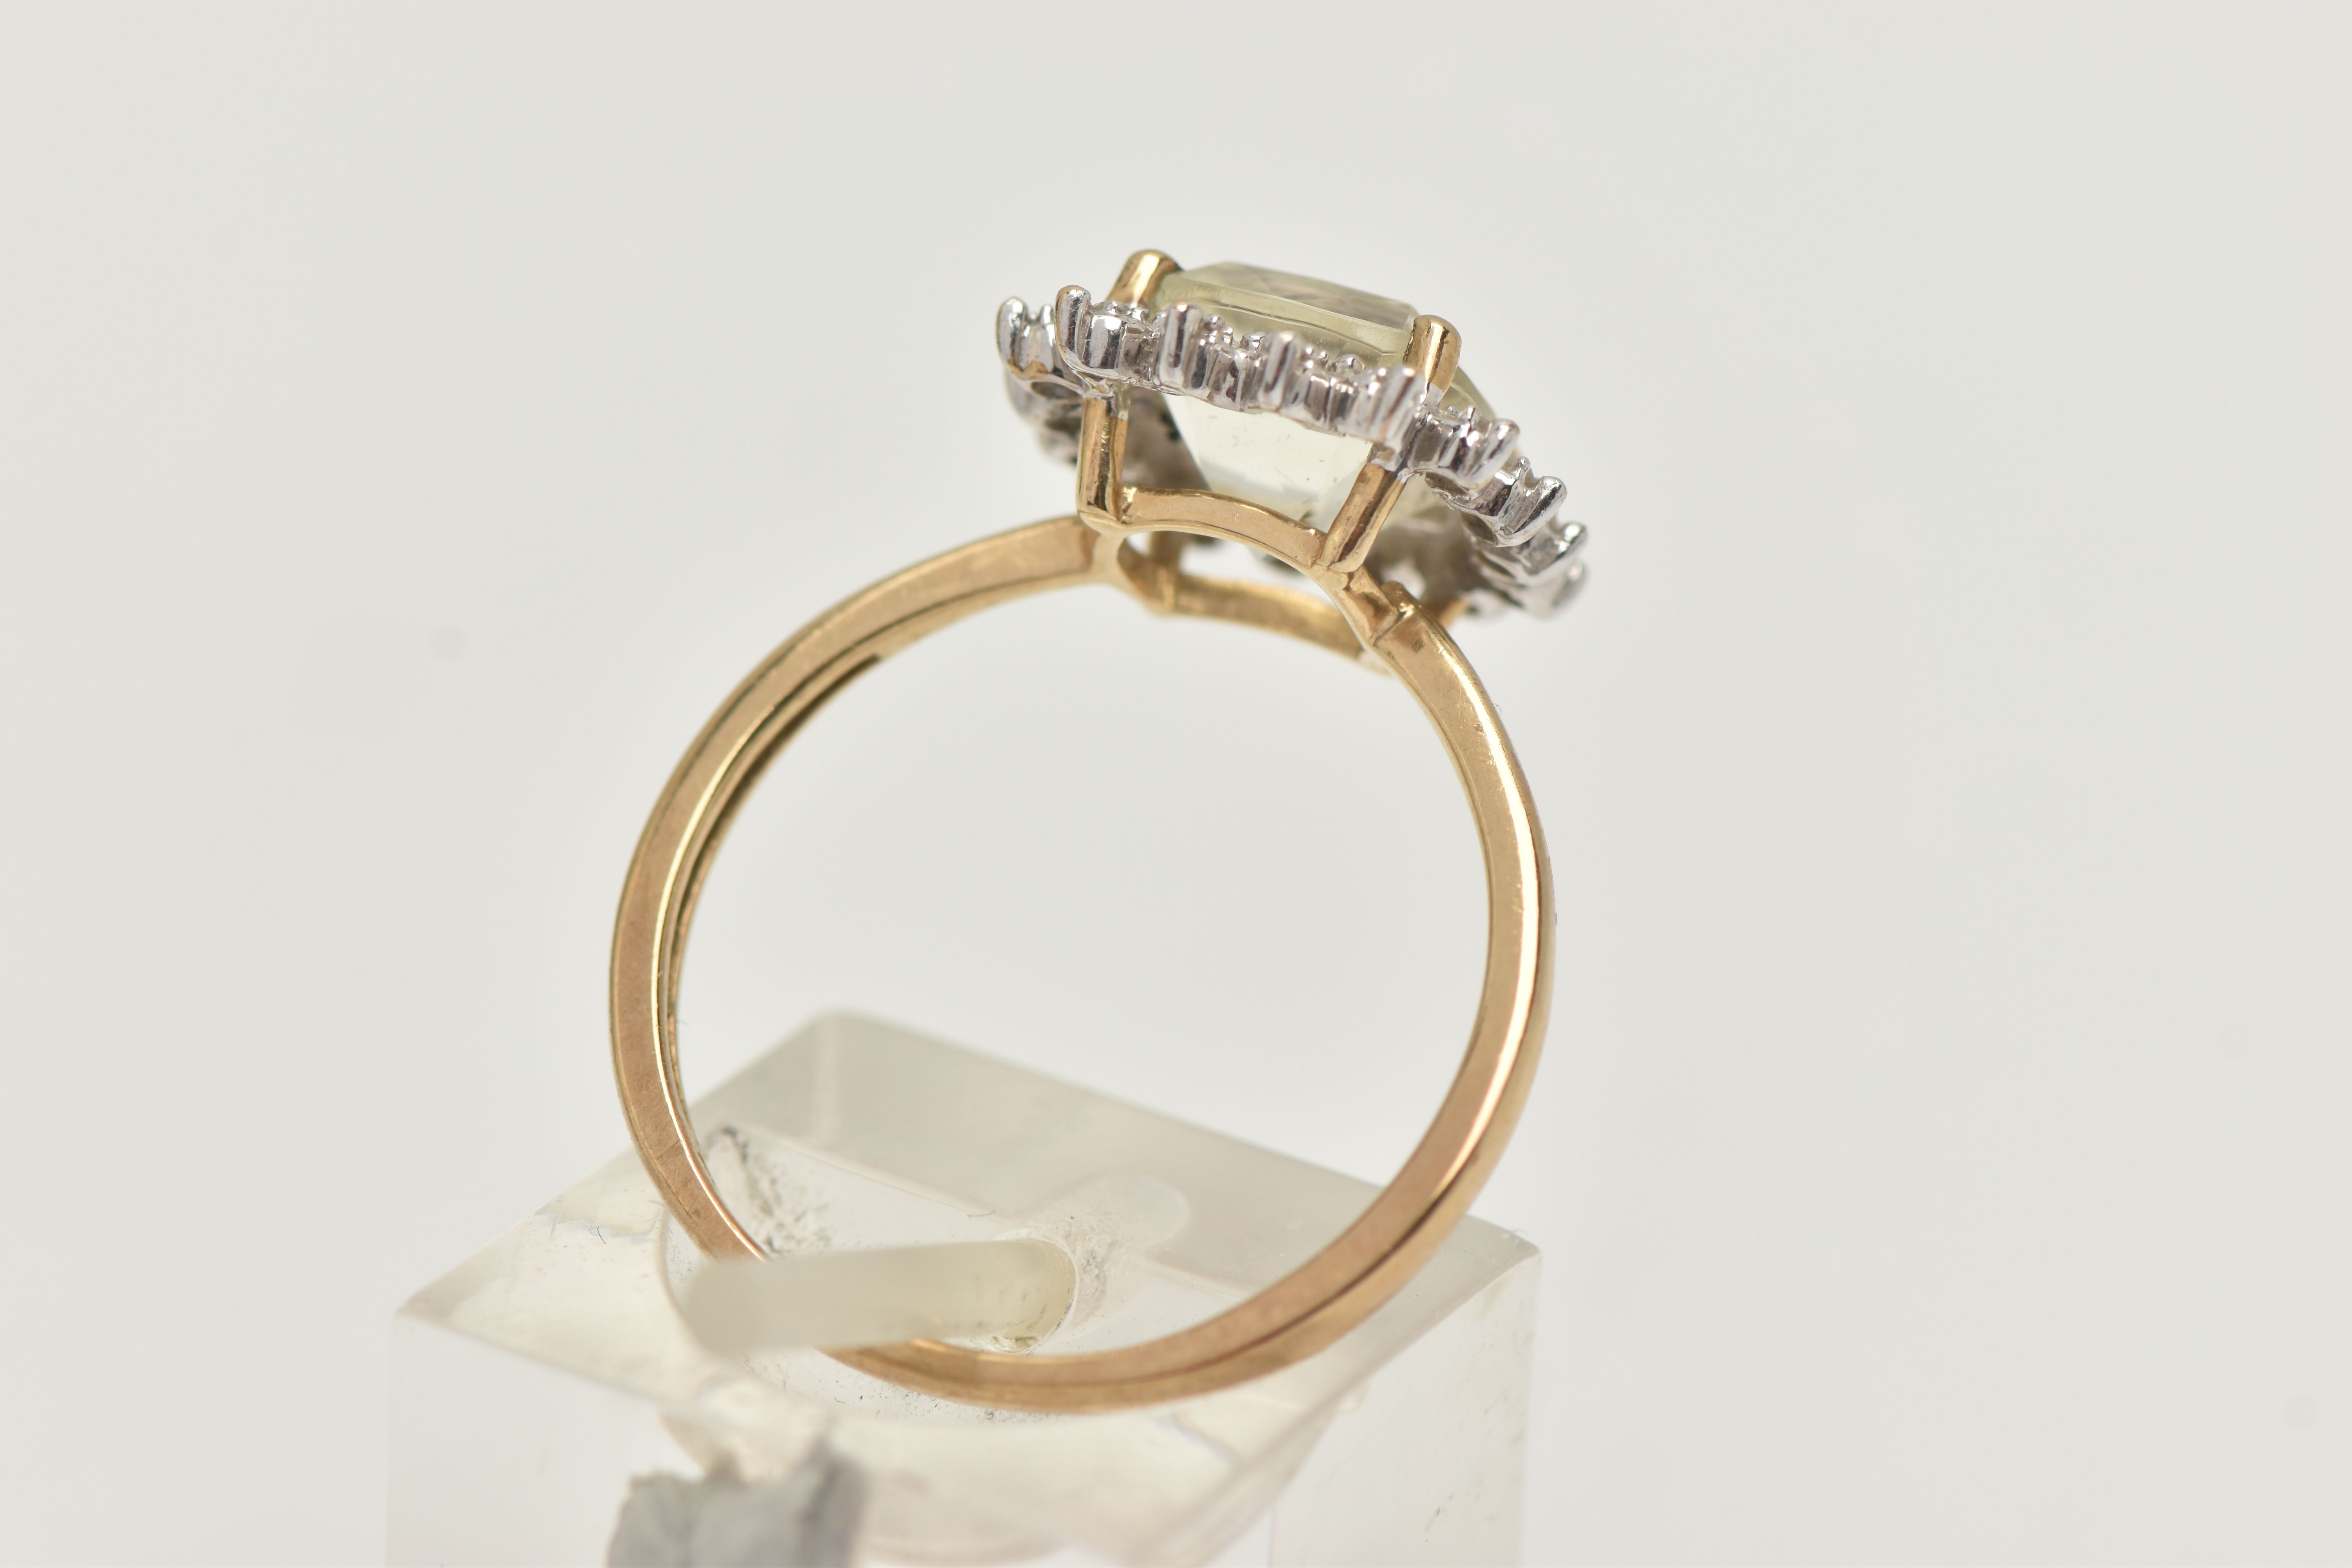 A 9CT GOLD GEM SET CLUSTER RING, mixed cushion cut colourless stone, possibly topaz, measuring - Image 3 of 4